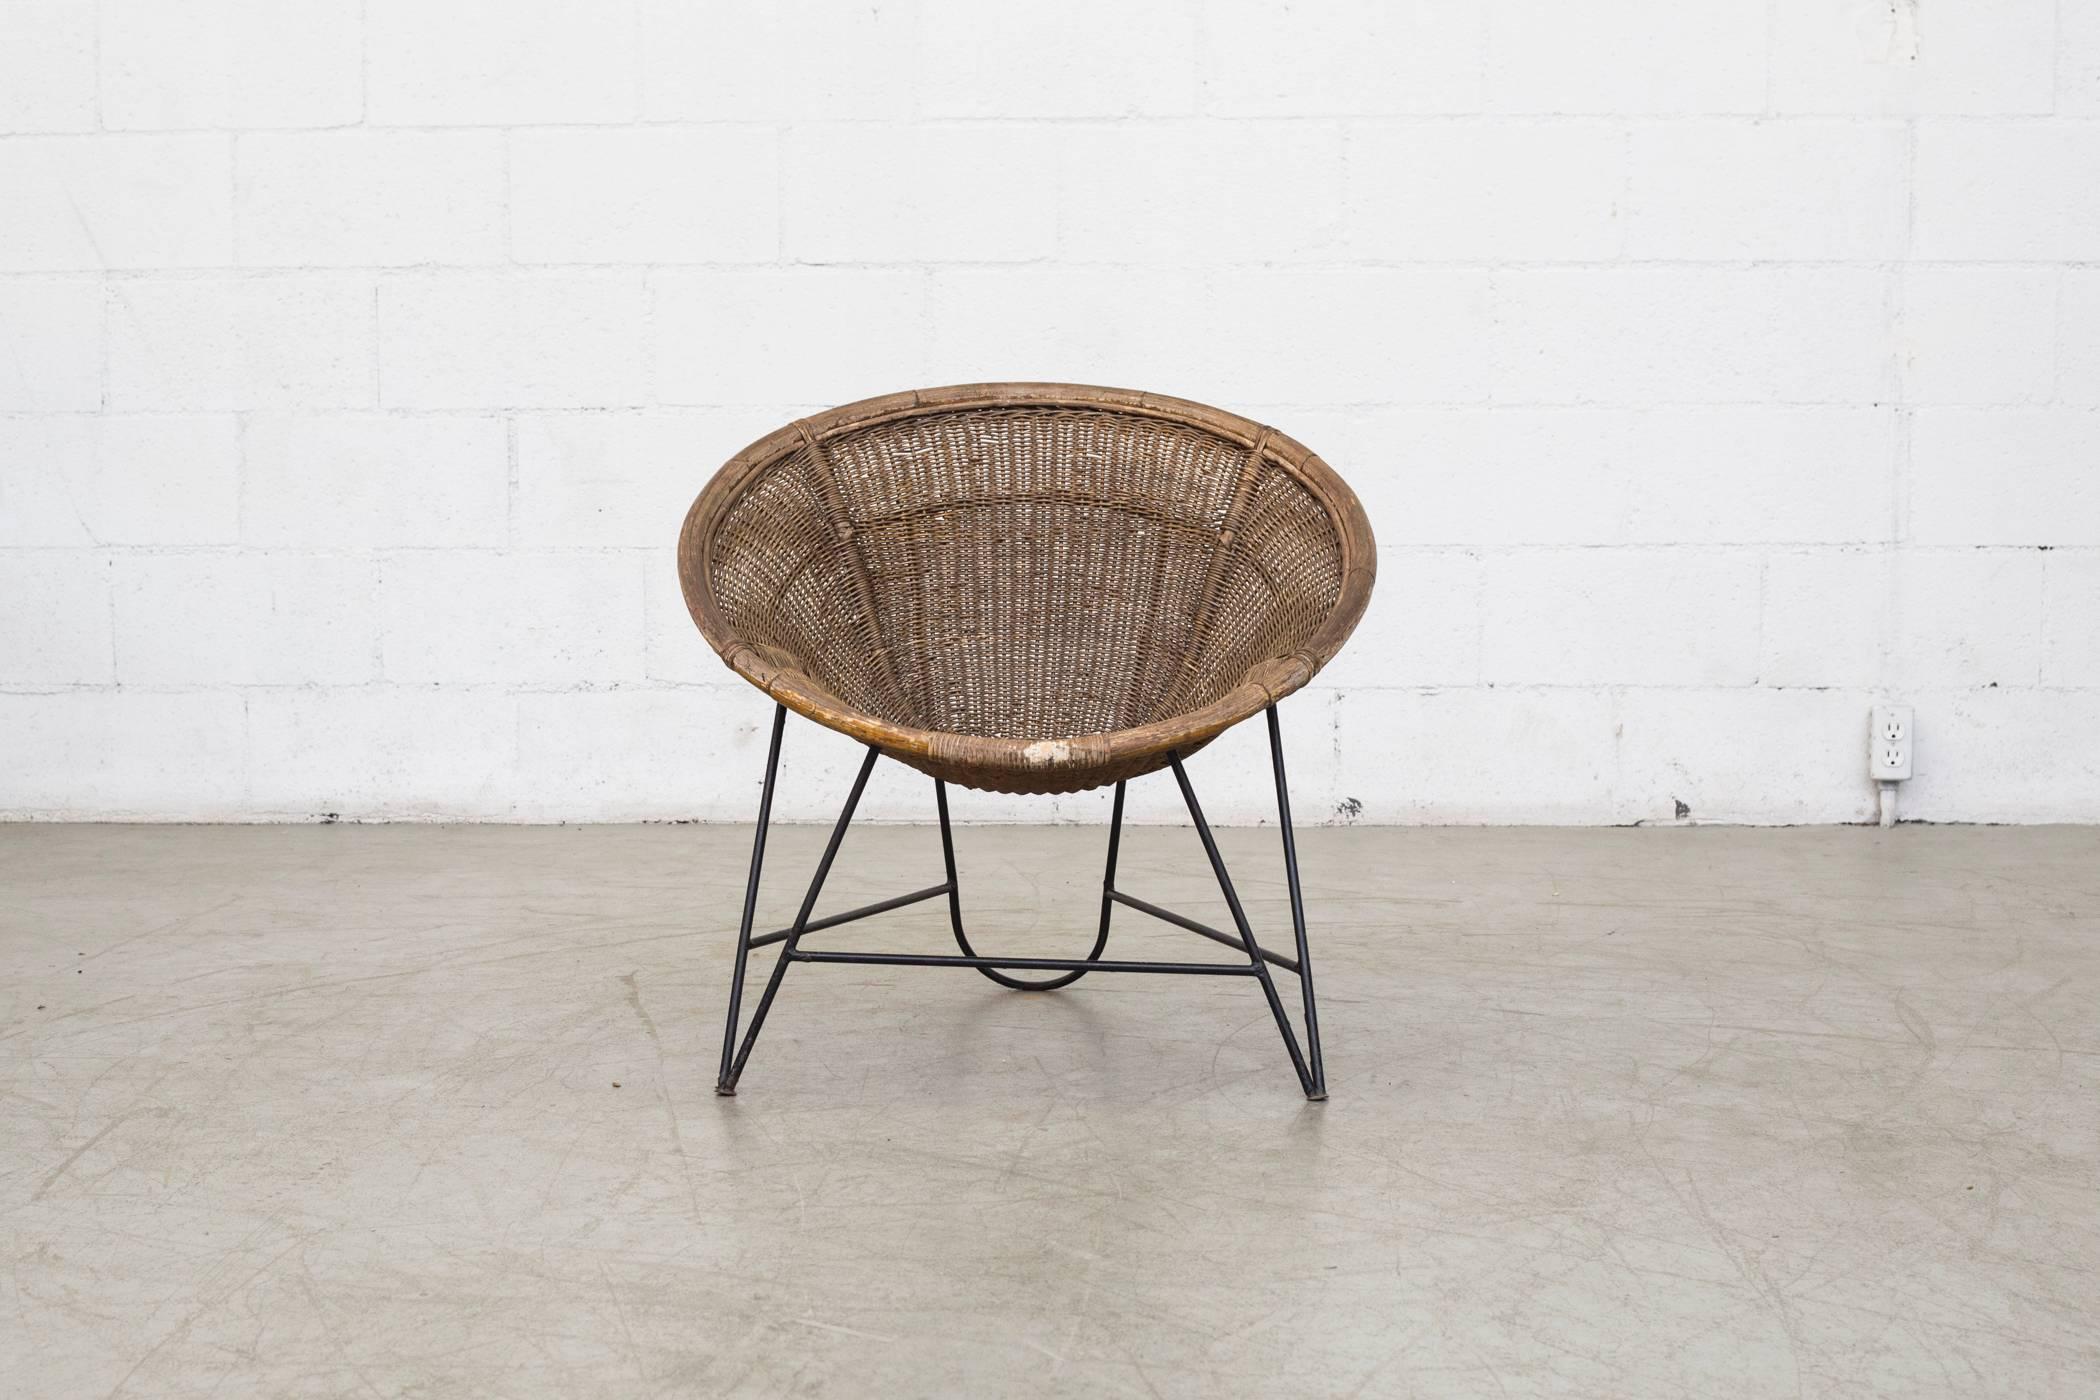 Amazing Jacques Adnet style woven basket chair with woven rattan basket and black enameled metal frame in original condition with visible wear and patina.